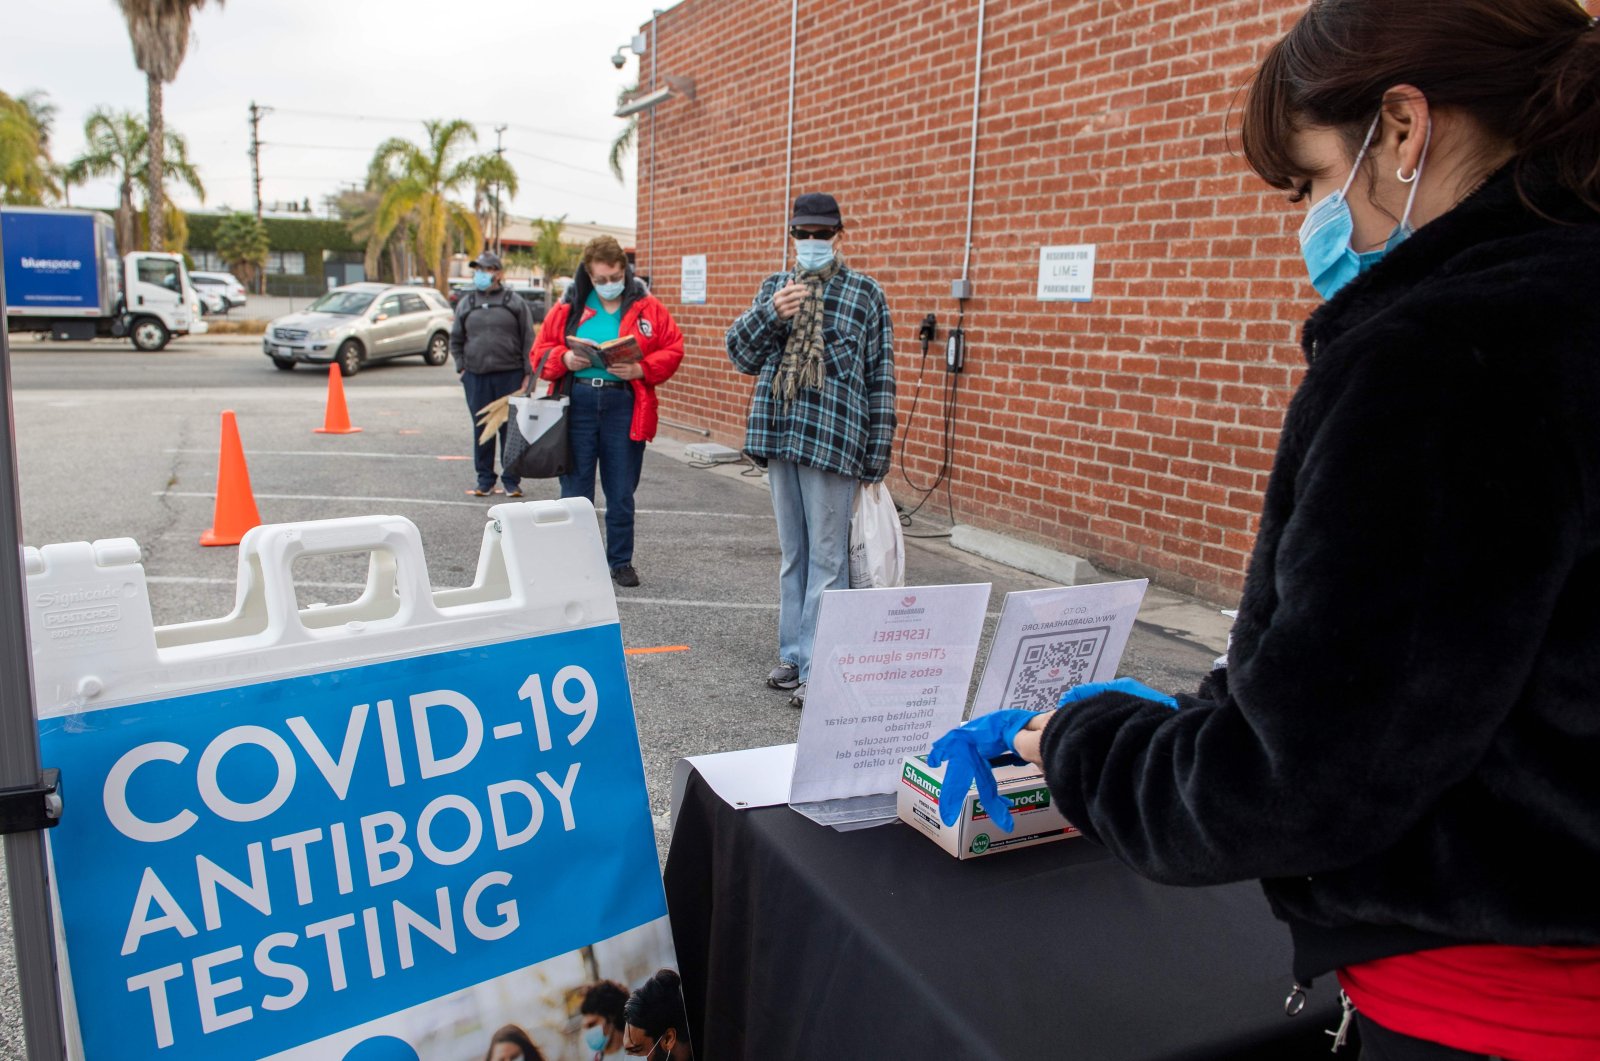 People wait in line for the "No Cost Antibody" testing event organized by Calvary Baptist Church of Santa Monica and GUARDaHEART Foundation in Santa Monica, California, U.S., Jan. 19, 2021. (AFP Photo)